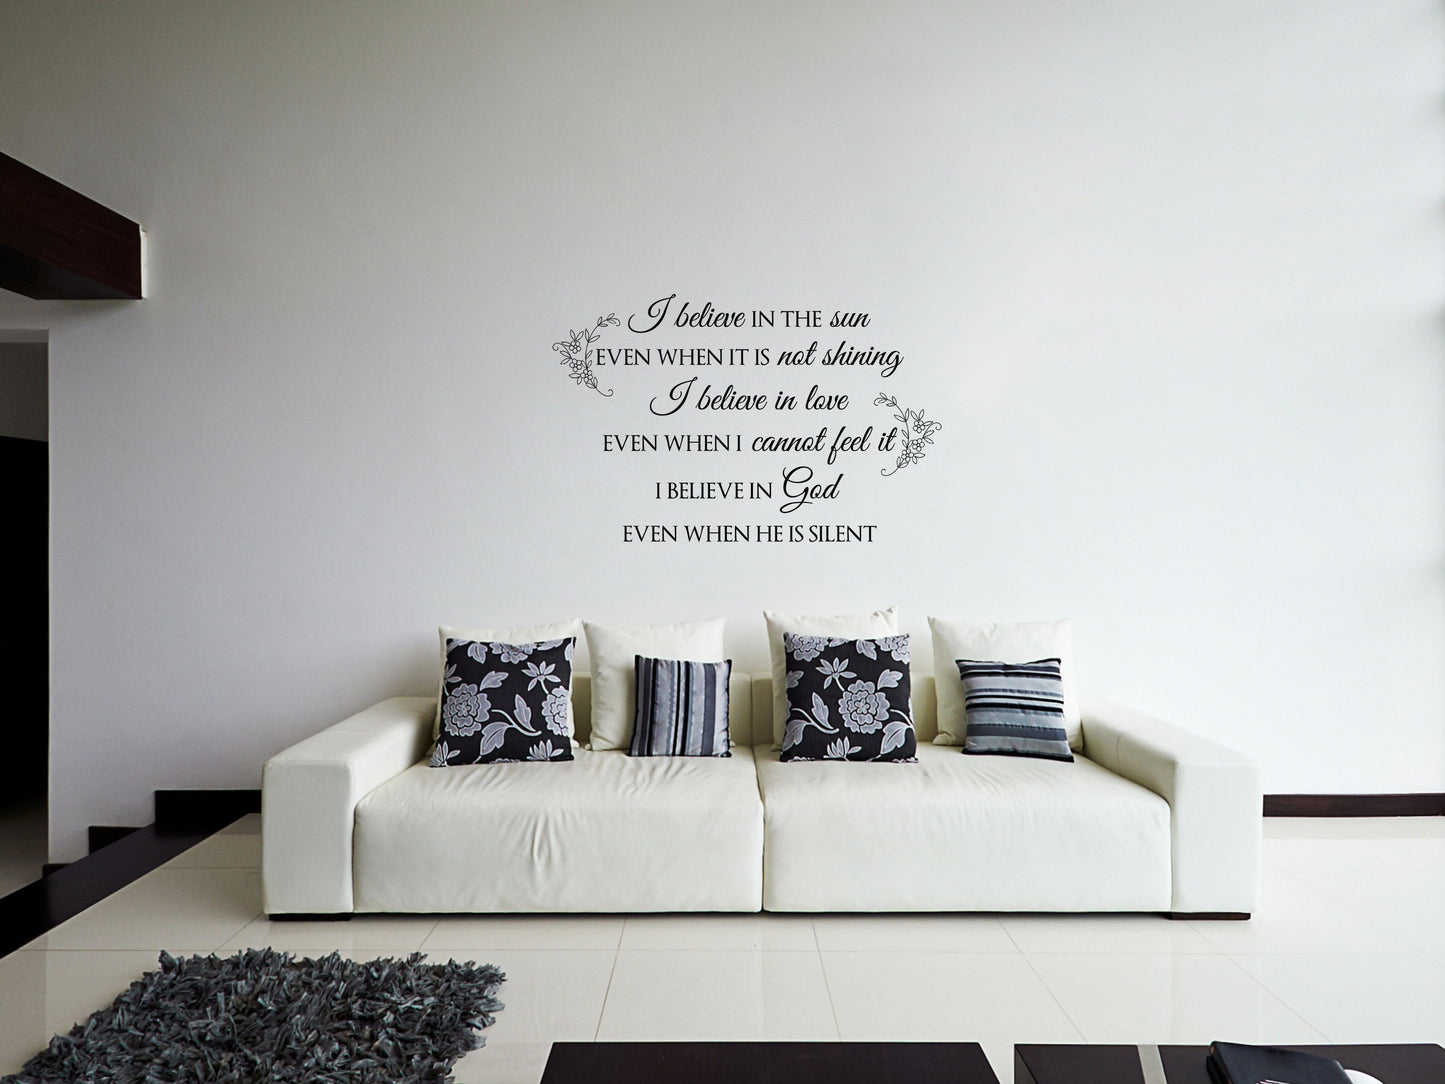 I Am Strong Vinyl Wall Decal - Motivational Wall Vinyl Quote -  Inspirational Wall Saying Sticker